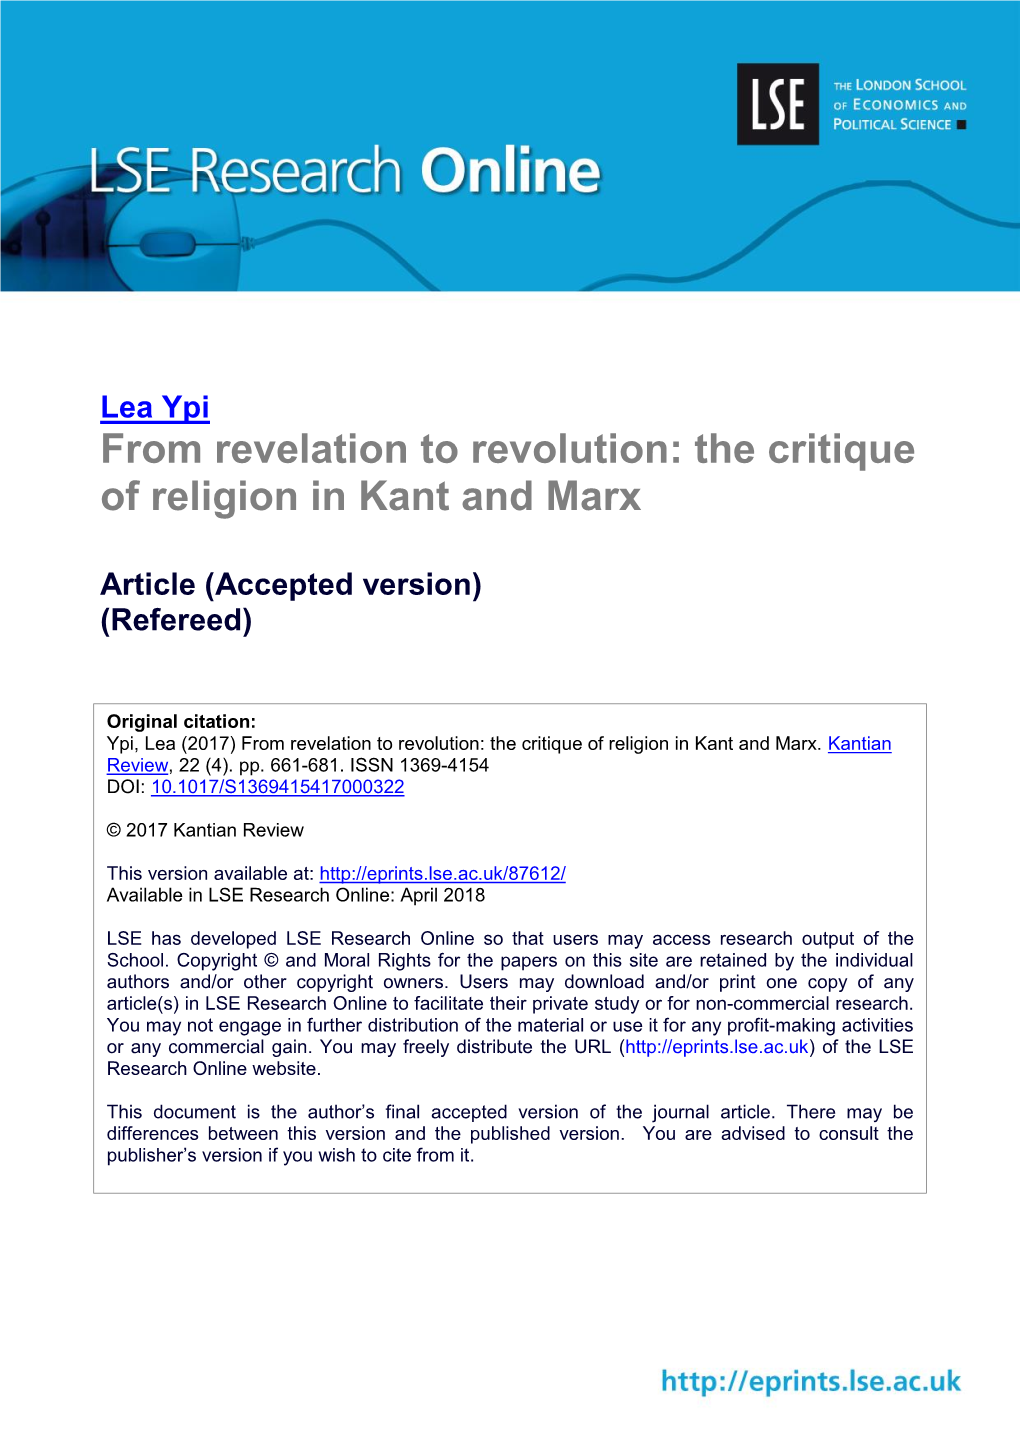 From Revelation to Revolution: the Critique of Religion in Kant and Marx